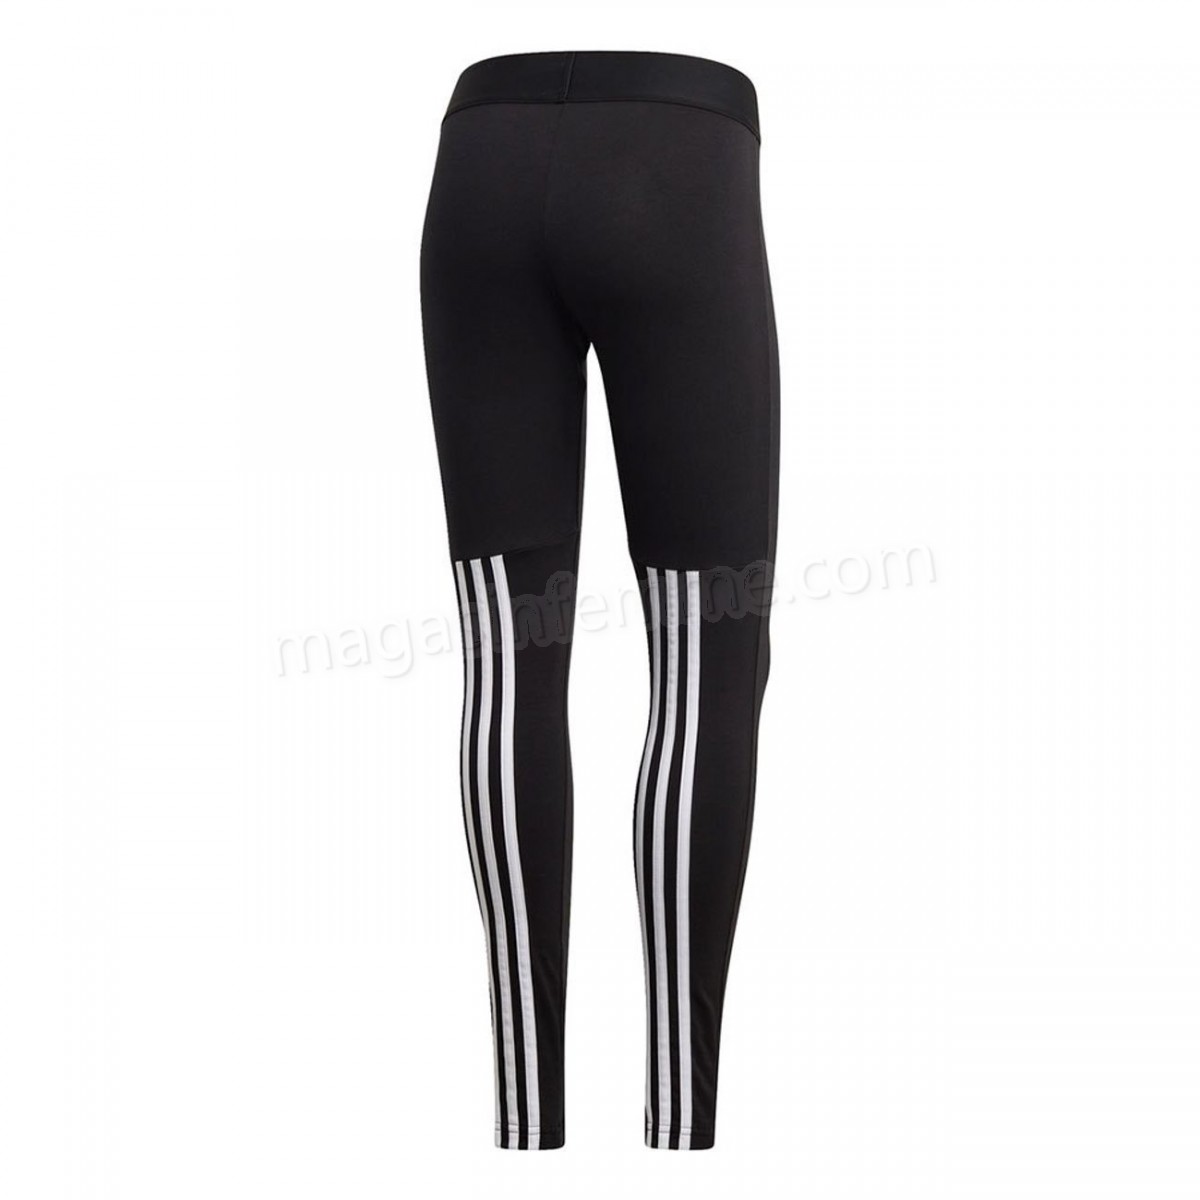 Adidas-Fitness femme ADIDAS Collant femme adidas Must Haves 3-Stripes en solde - -3